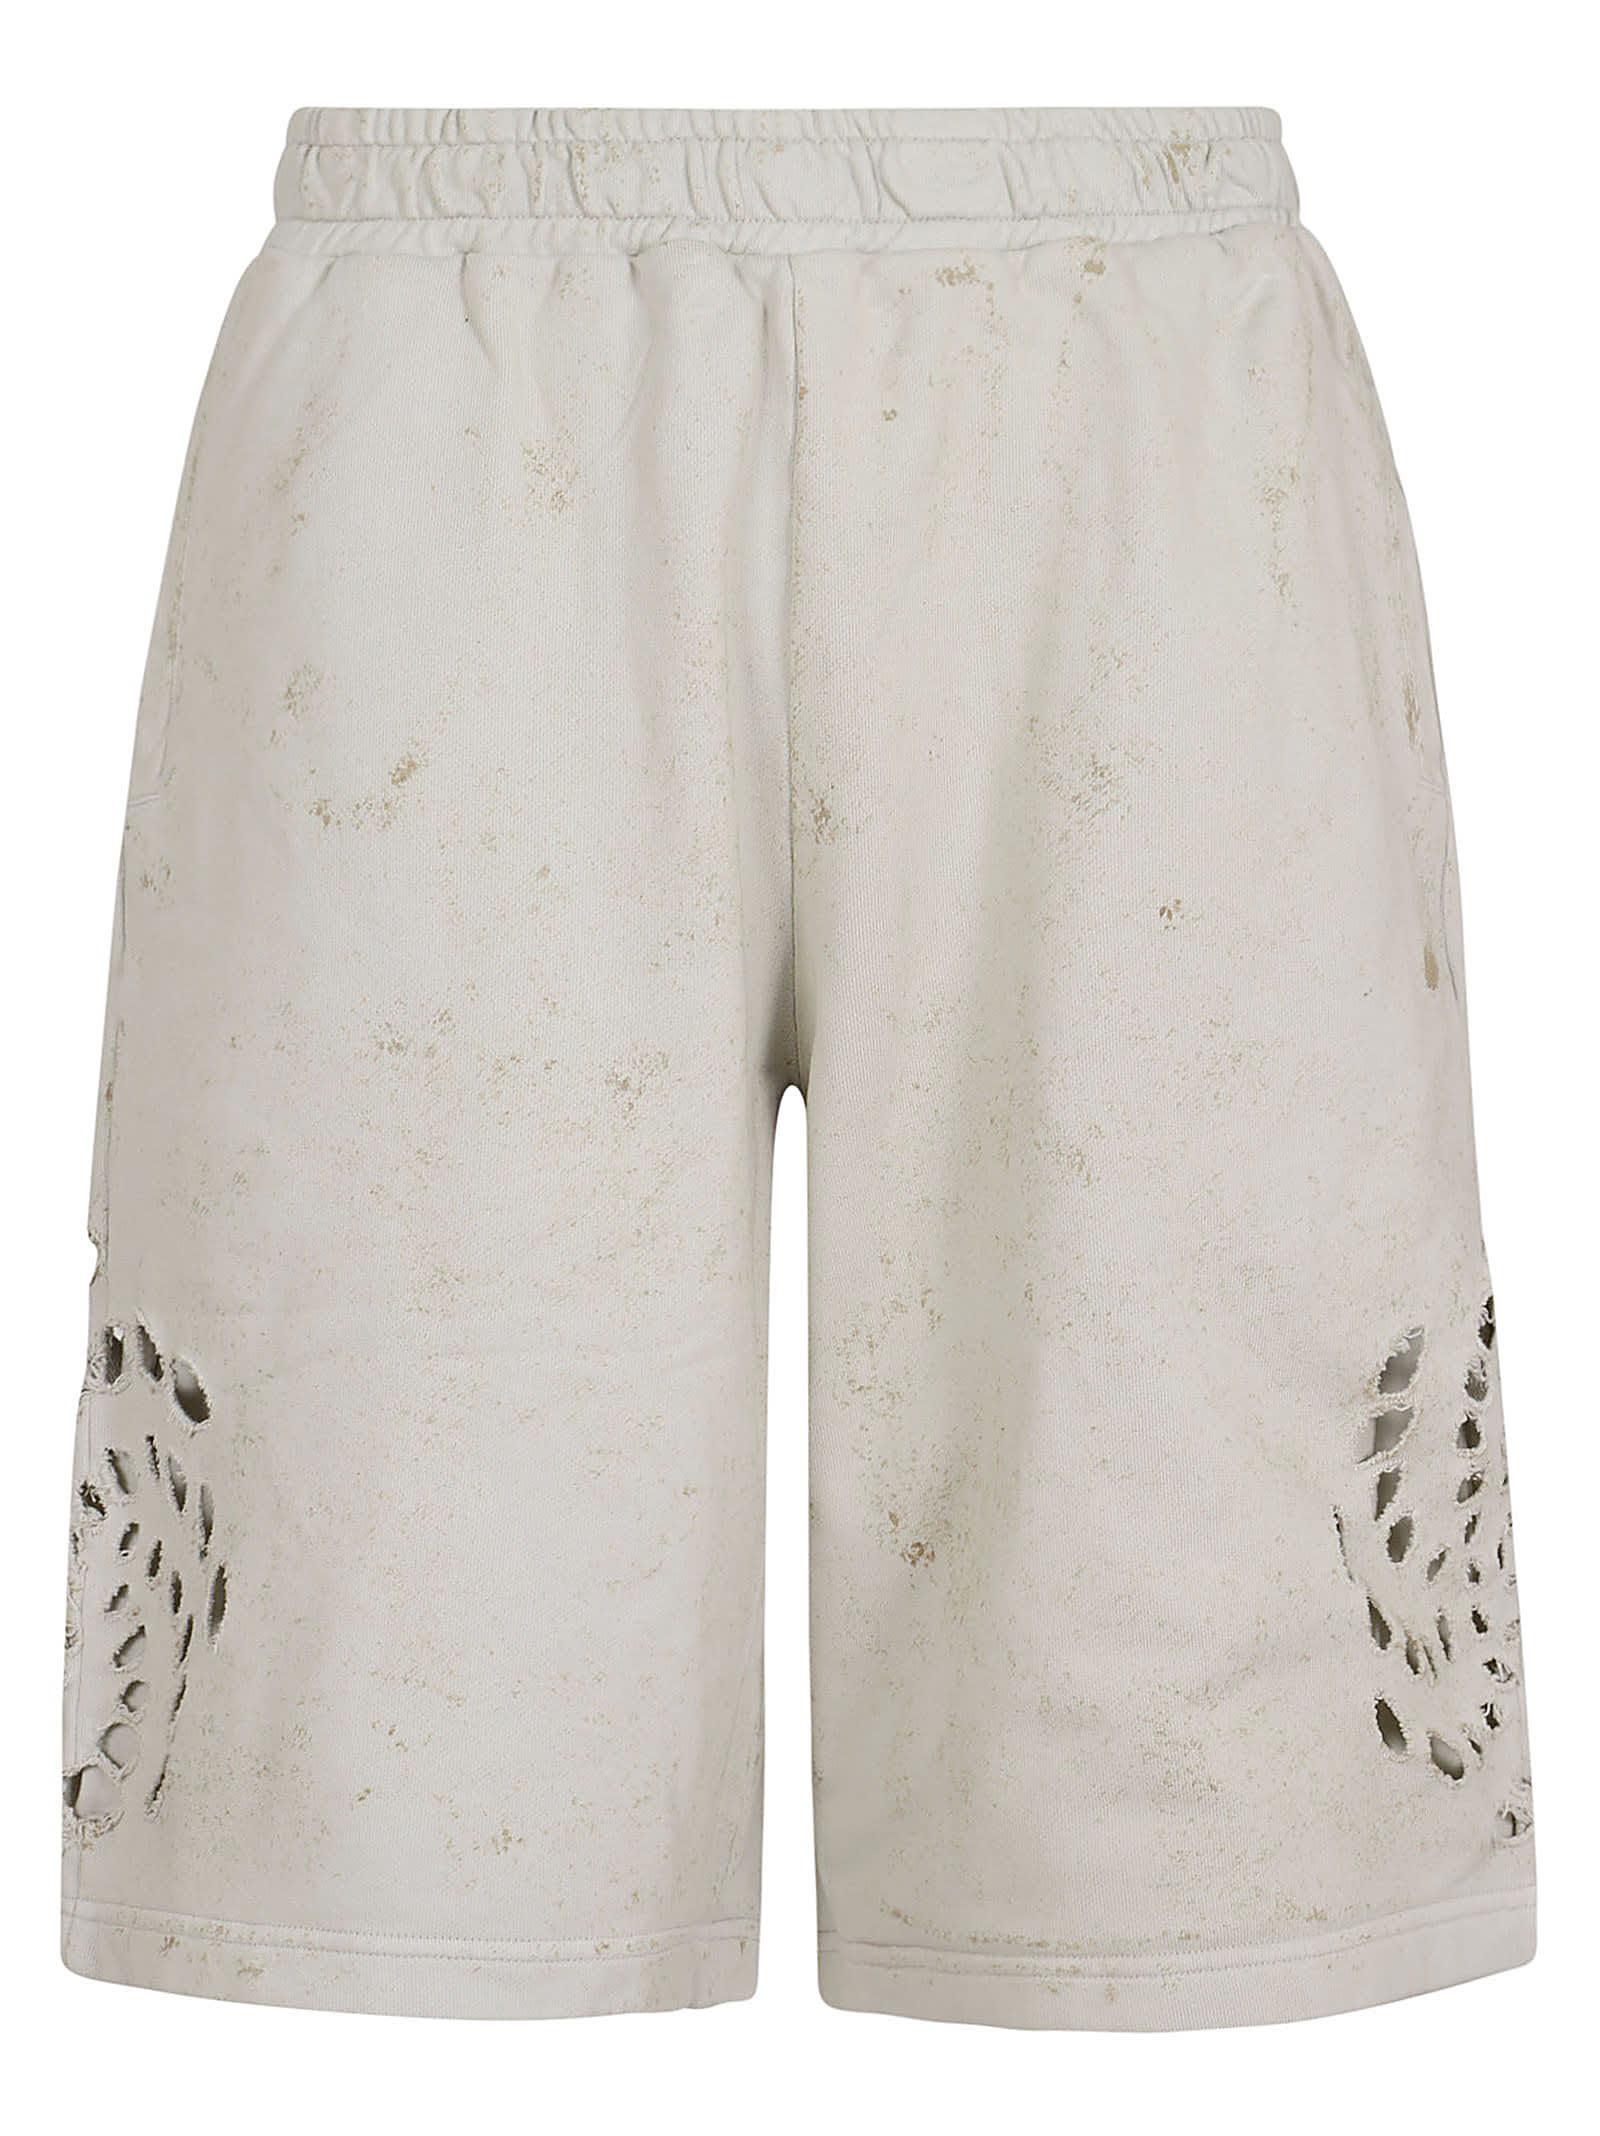 Shop 44 Label Group Trip Short Jersey In Dirty White Gyps